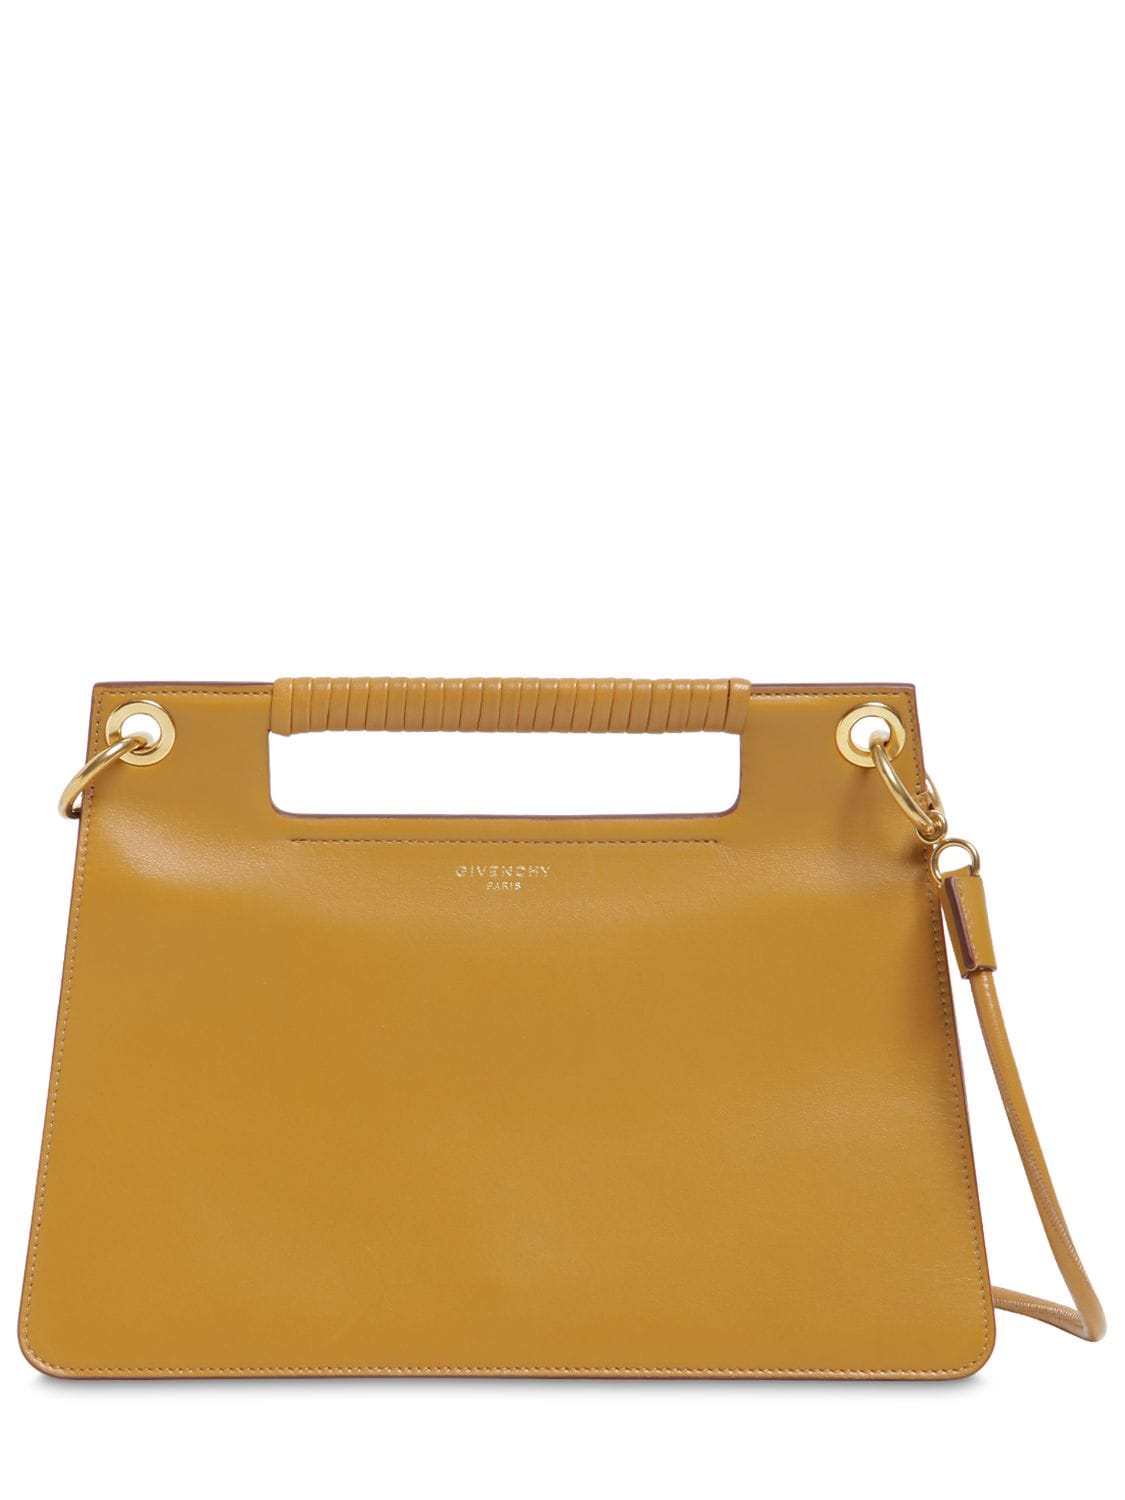 Givenchy Whip Medium Leather Top Handle Bag In Mustard